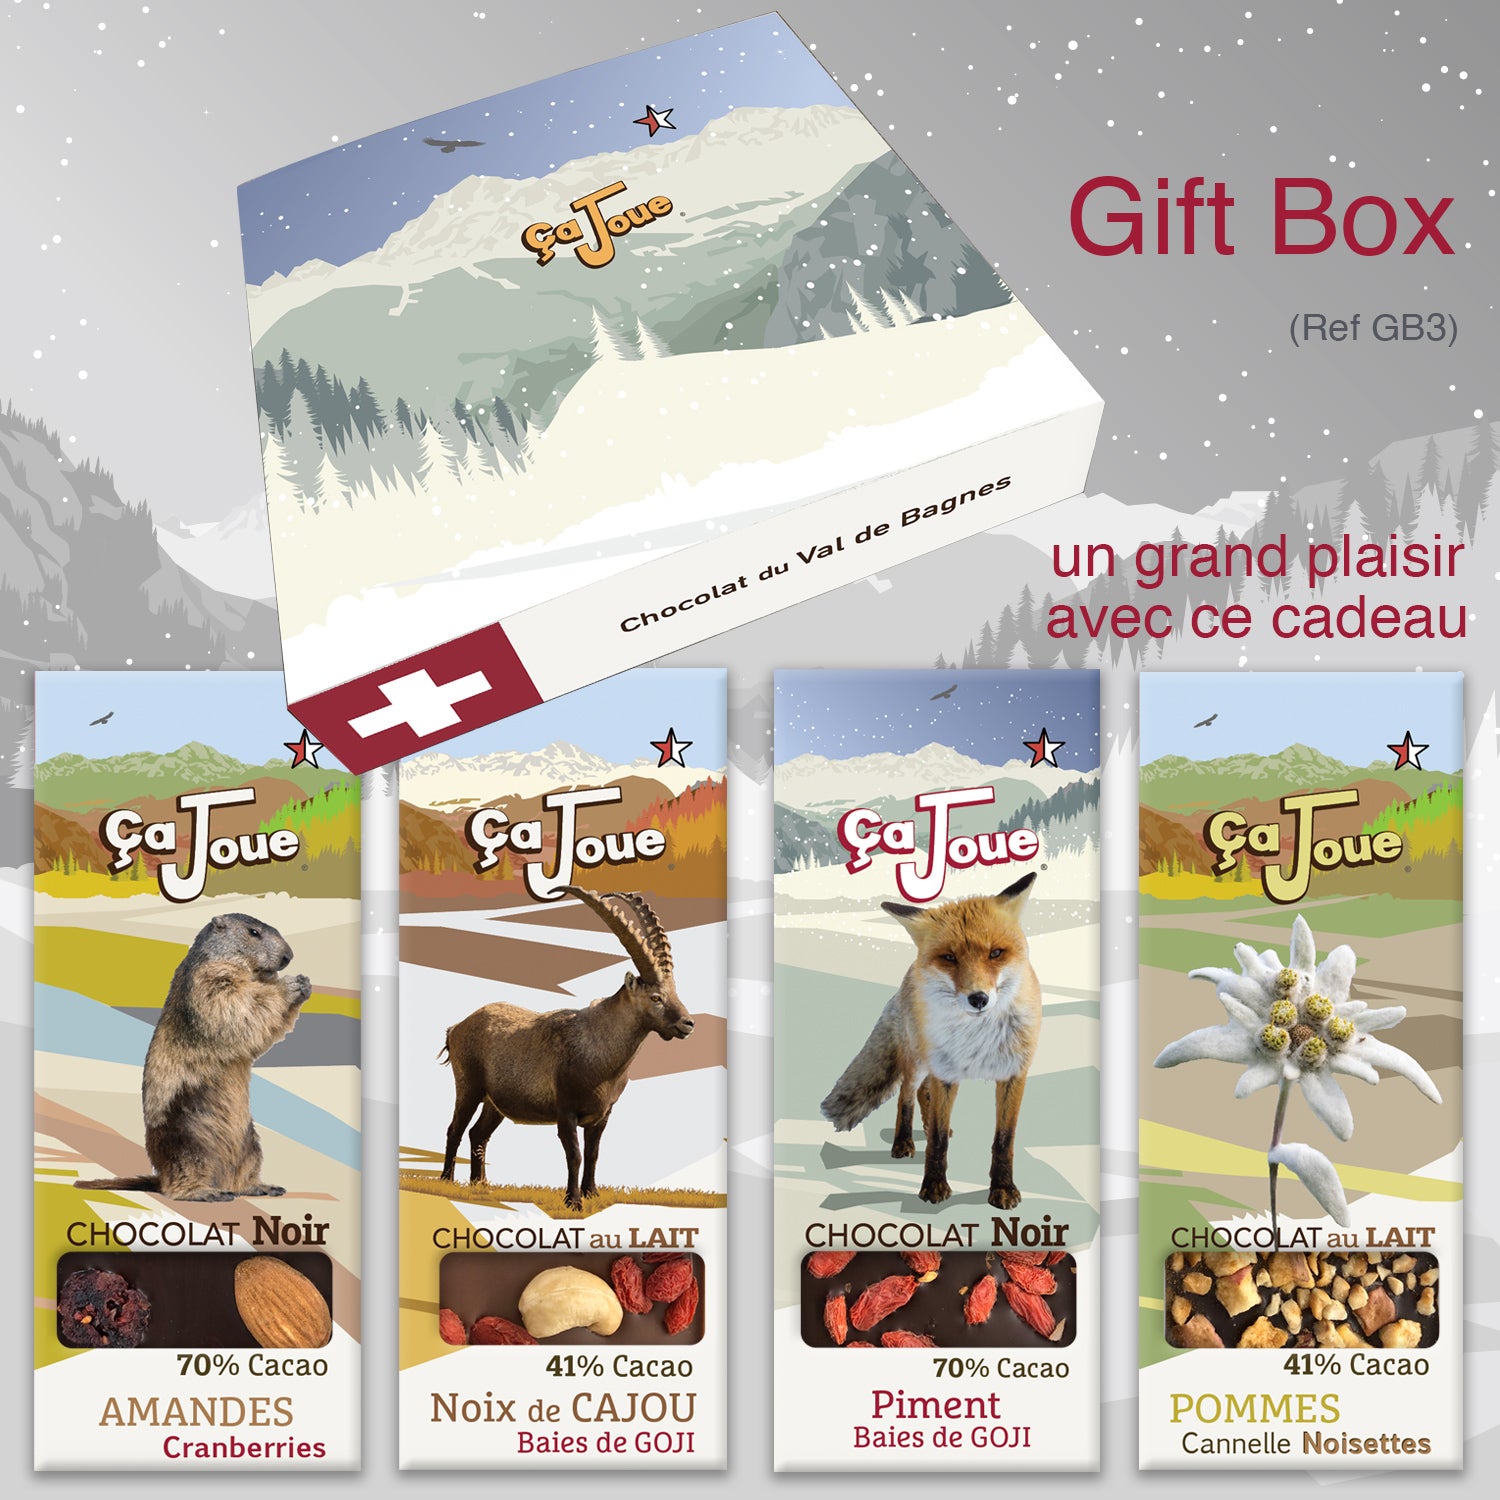 Gift Box (Ref GB3) Chocolate from Val de Bagnes